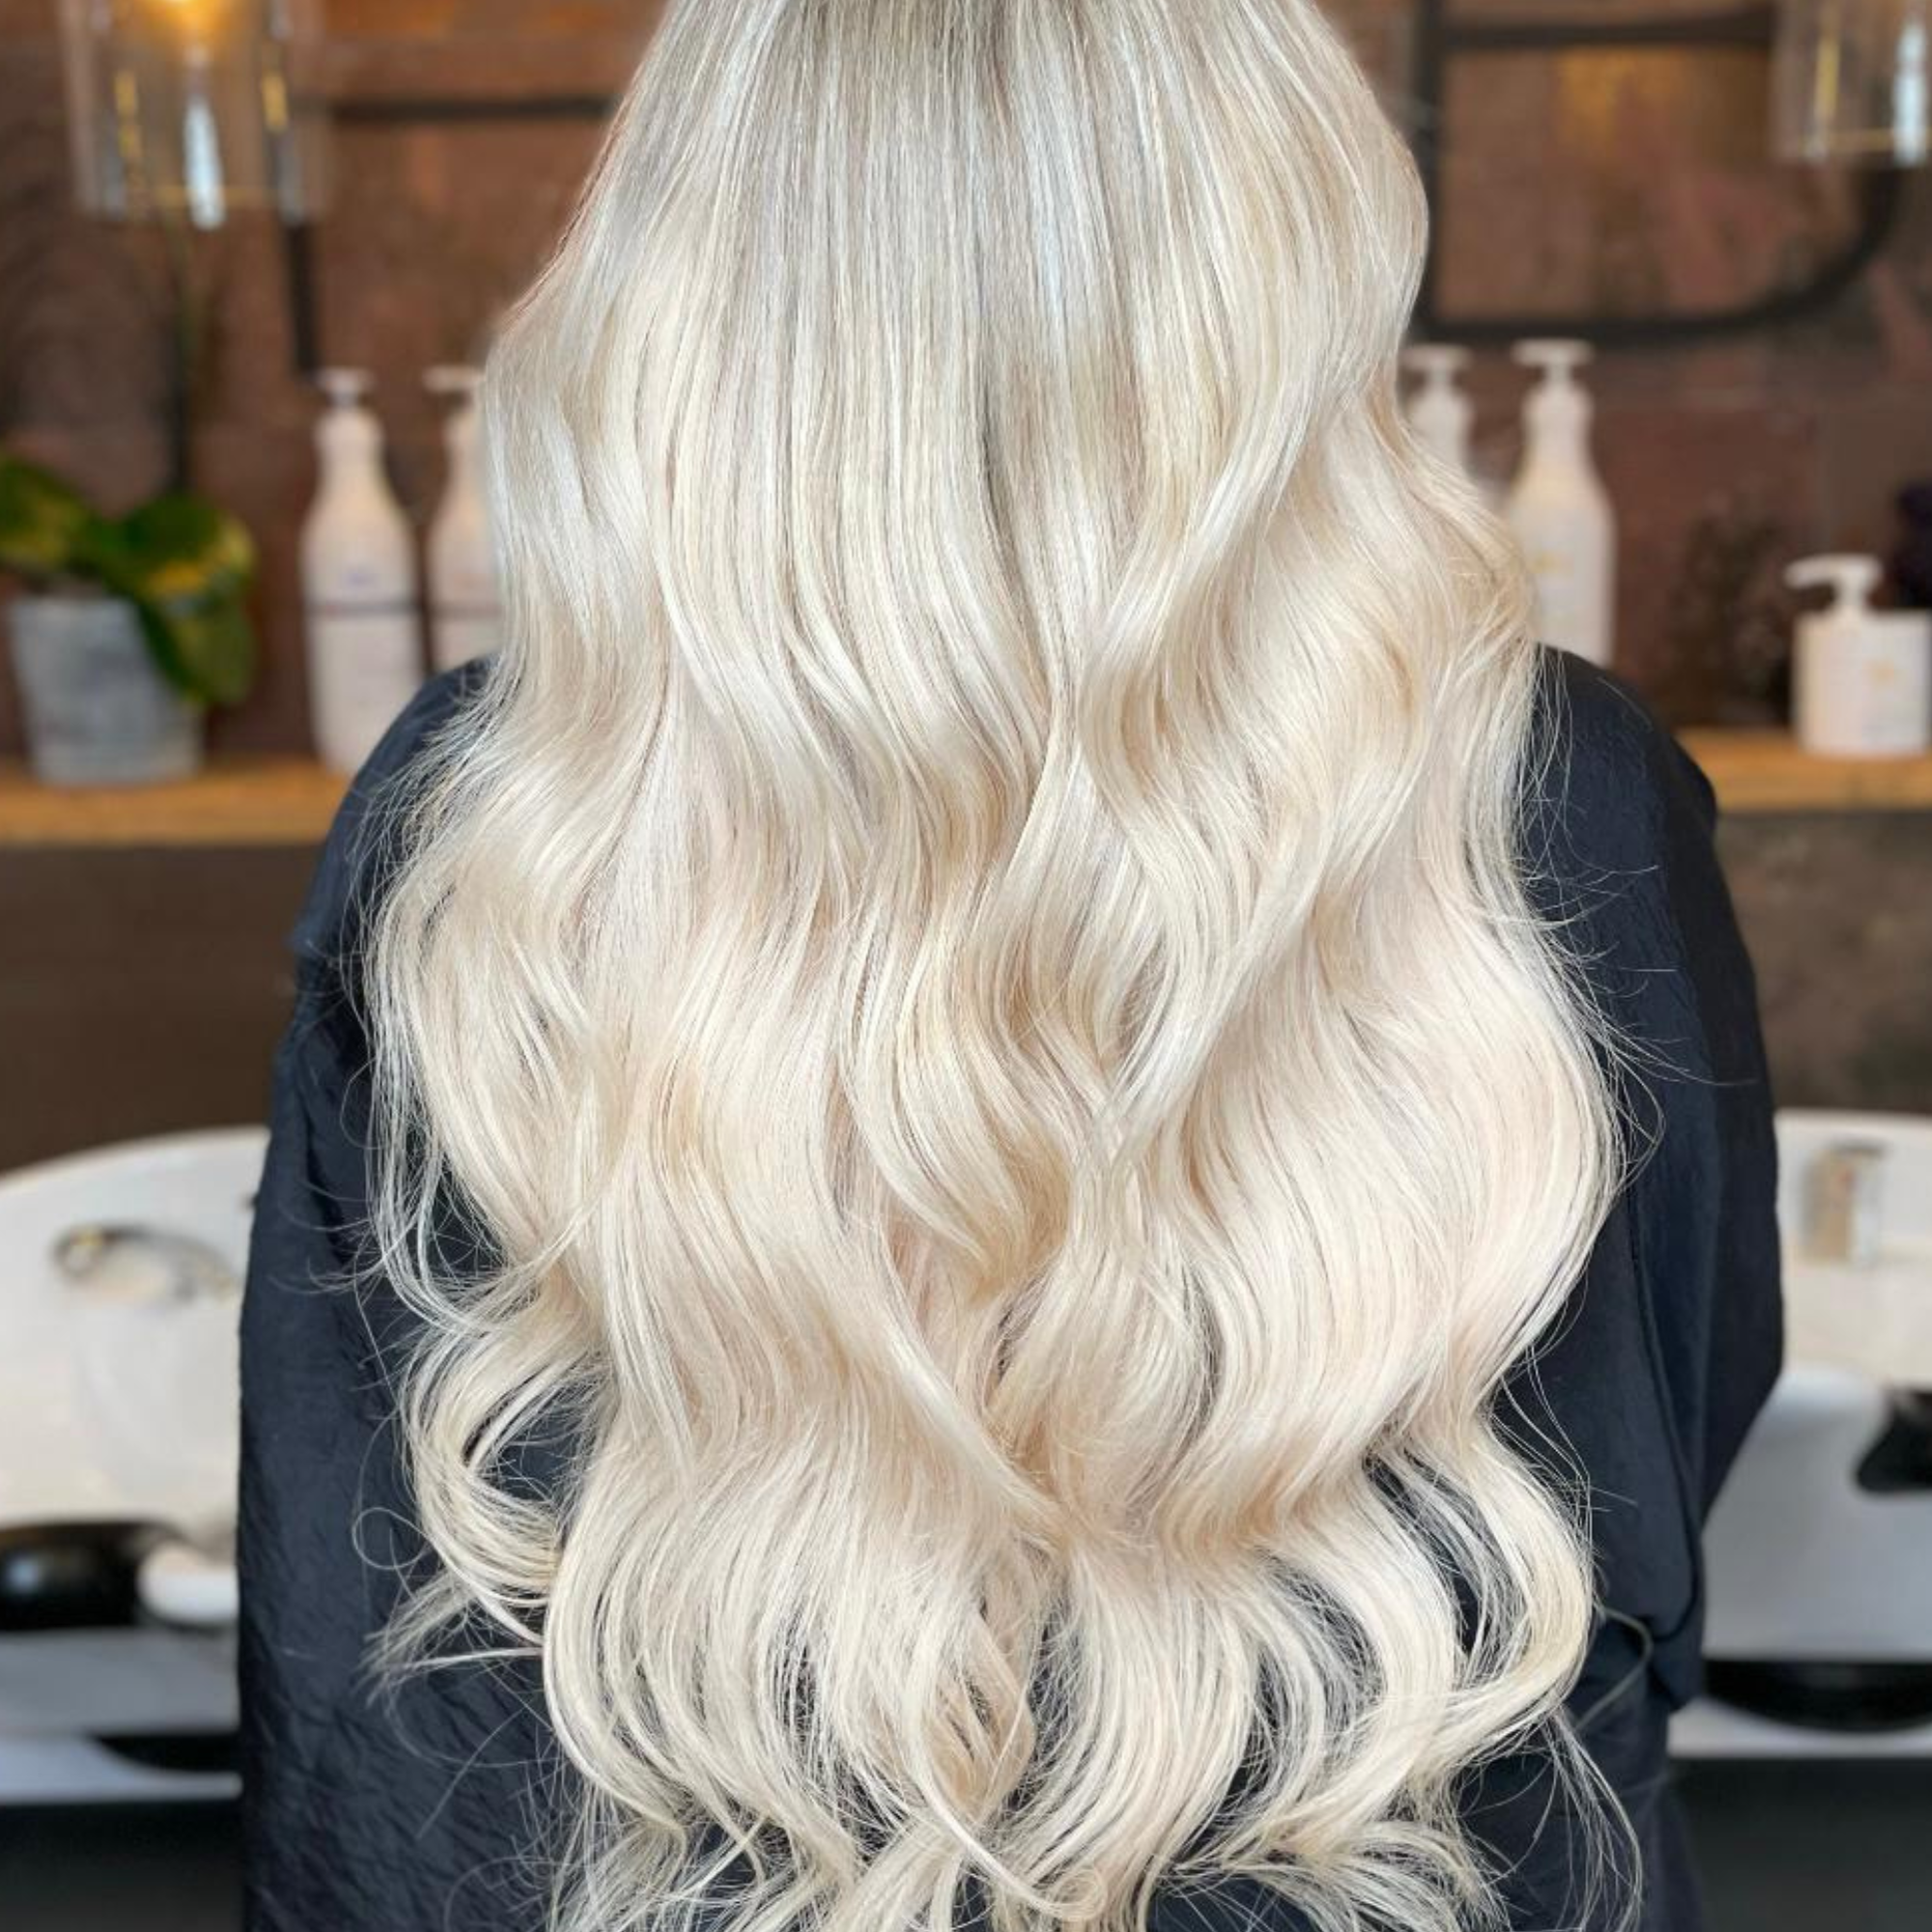 14" Invisible Tape Extensions Ice Blonde